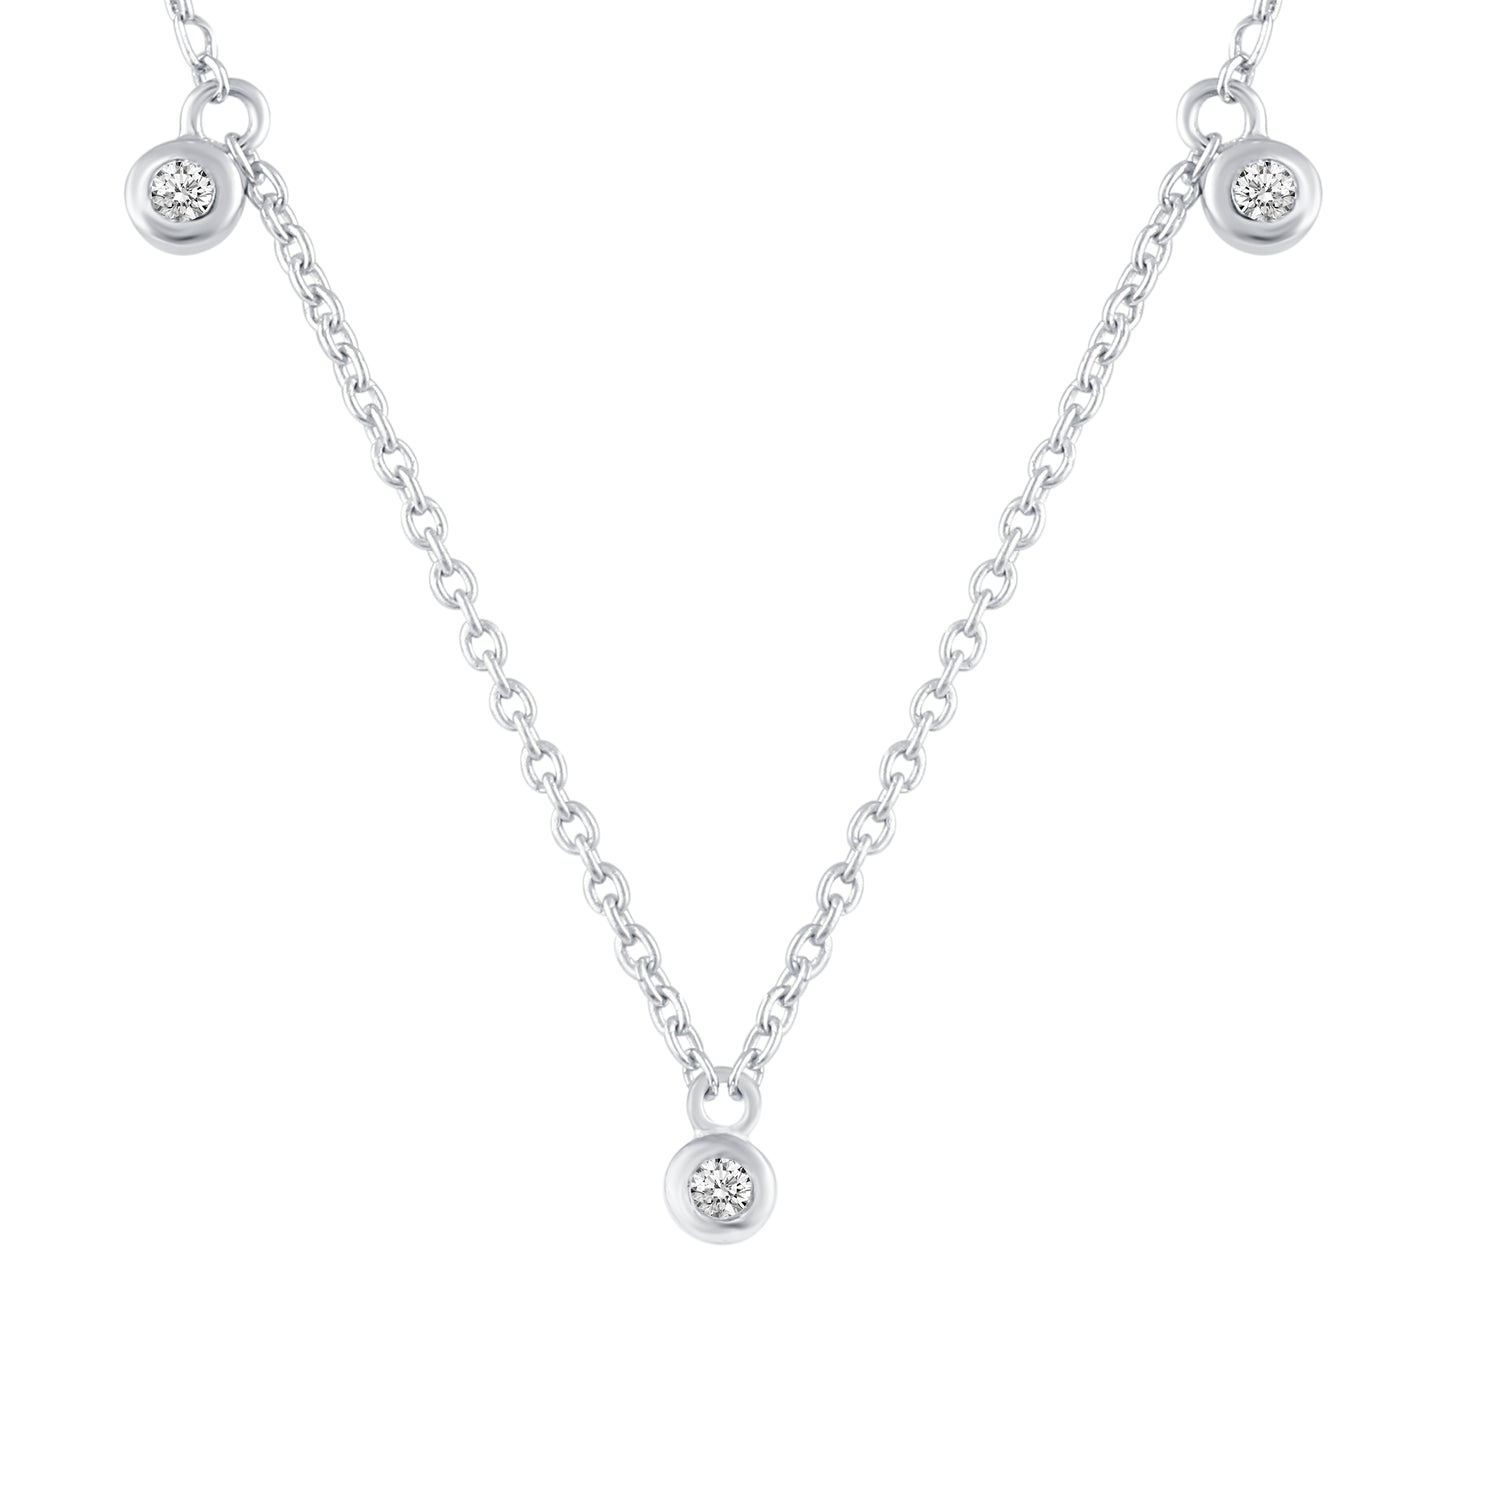 Three Stone Stations 1/20 Cttw Natural Diamond Pendant Necklace set in 925 Sterling Silver